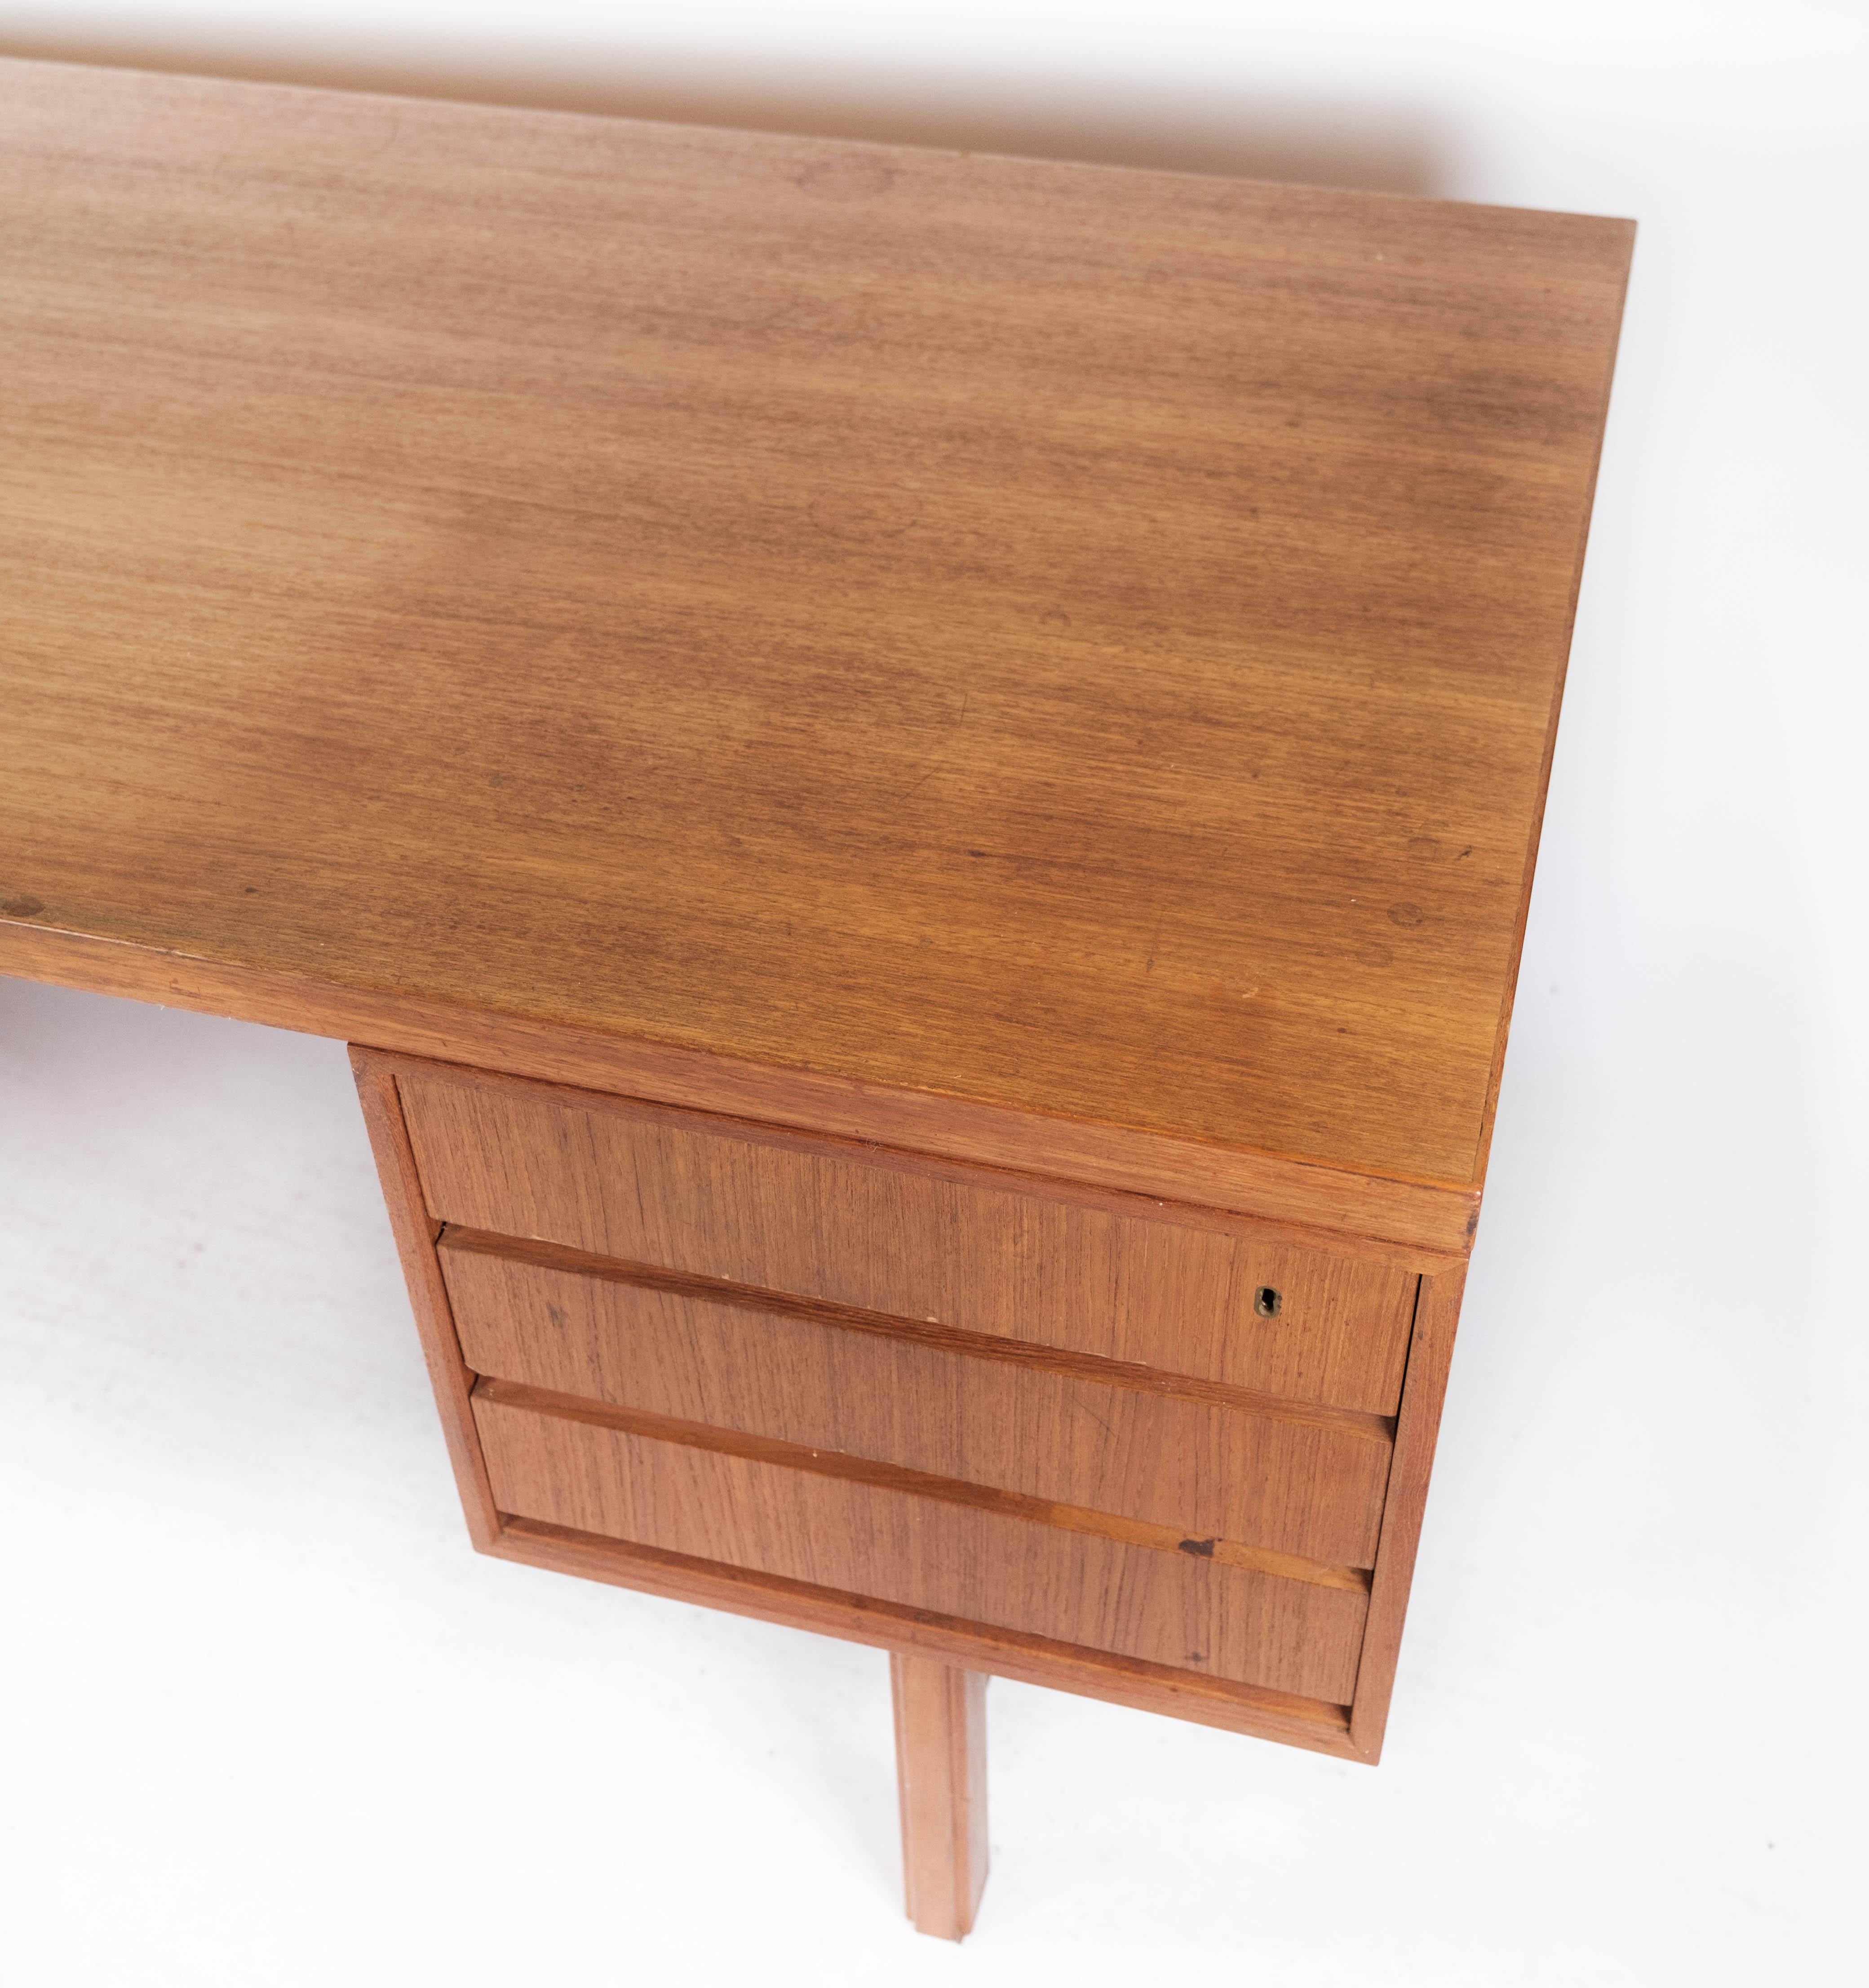 Mid-Century Modern Desk Made In Teak Designed By Omann Junior From 1960s For Sale